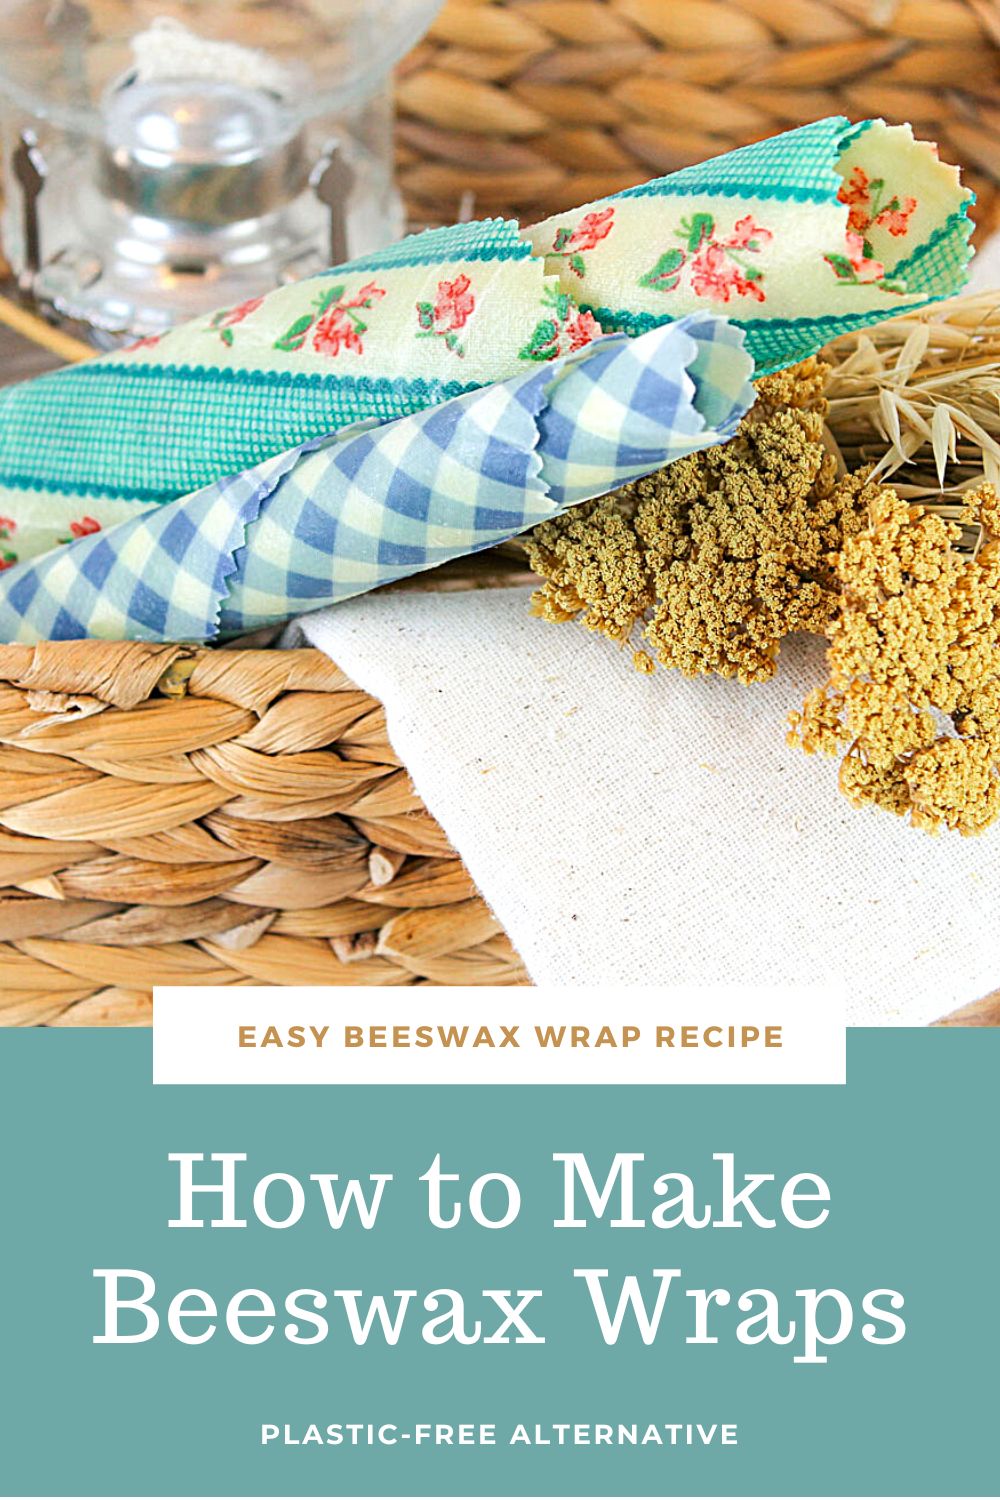 pinterest image featuring two rolls of beeswax wrap sitting in a wicker basket